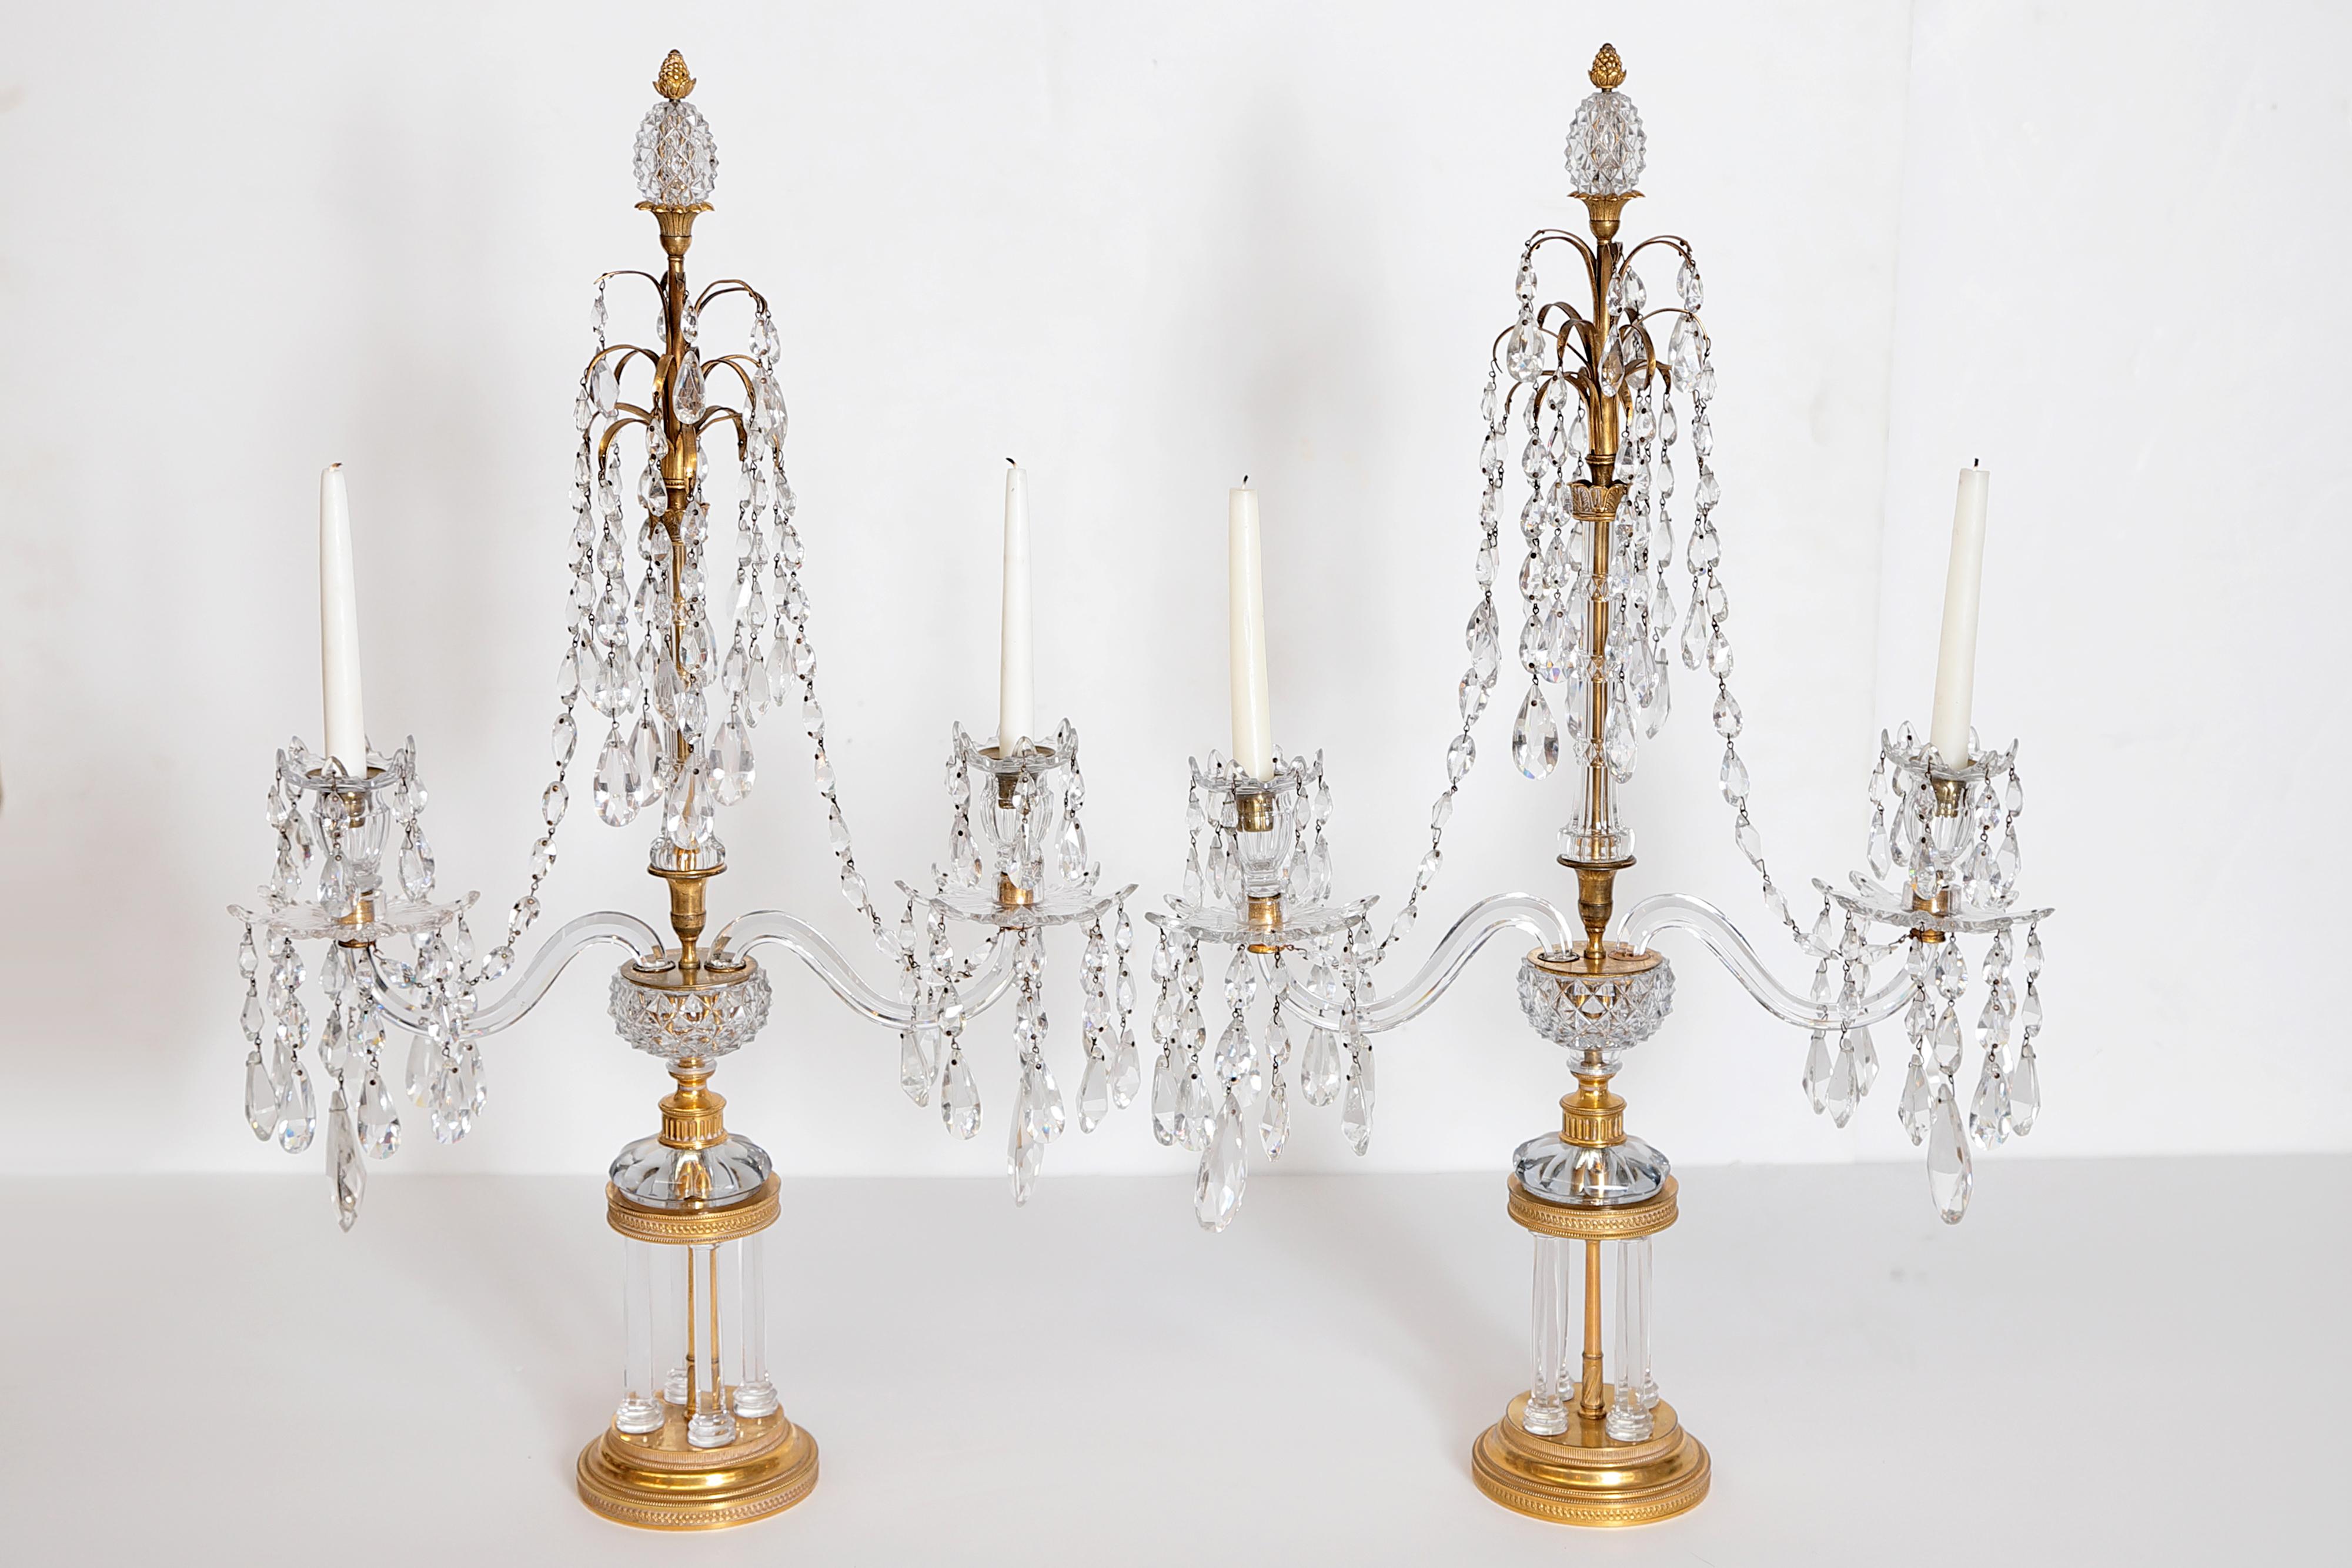 A beautiful pair of period English Regency candleabra / girandoles of cut-glass and gilt bronze, base of four glass columns, columnar body with two cut-glass branches (arms) fitted with cut-glass drip pans dripping and swagged with cut-glass pear